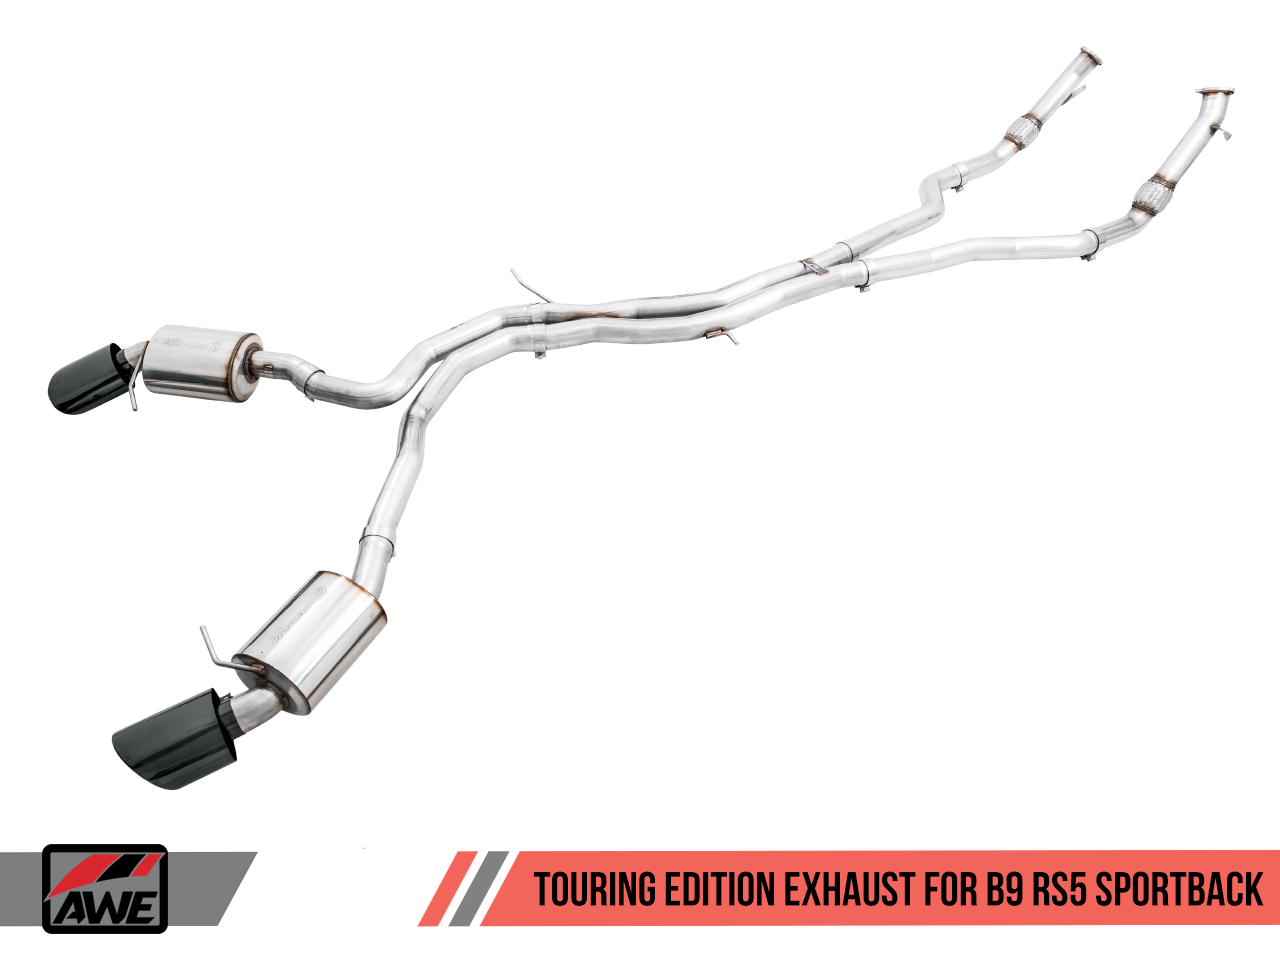 AWE Track Edition Exhaust for Audi B9 RS 5 Sportback - Resonated for Performance Catalysts - Diamond Black RS-style Tips - Motorsports LA